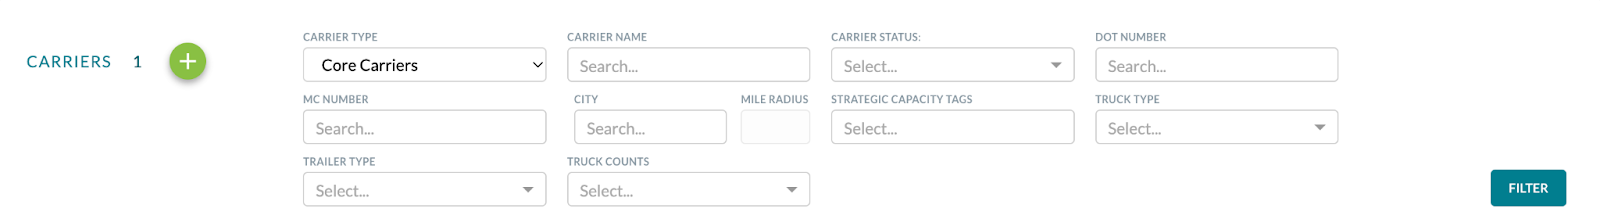 view carrier profile 1.png